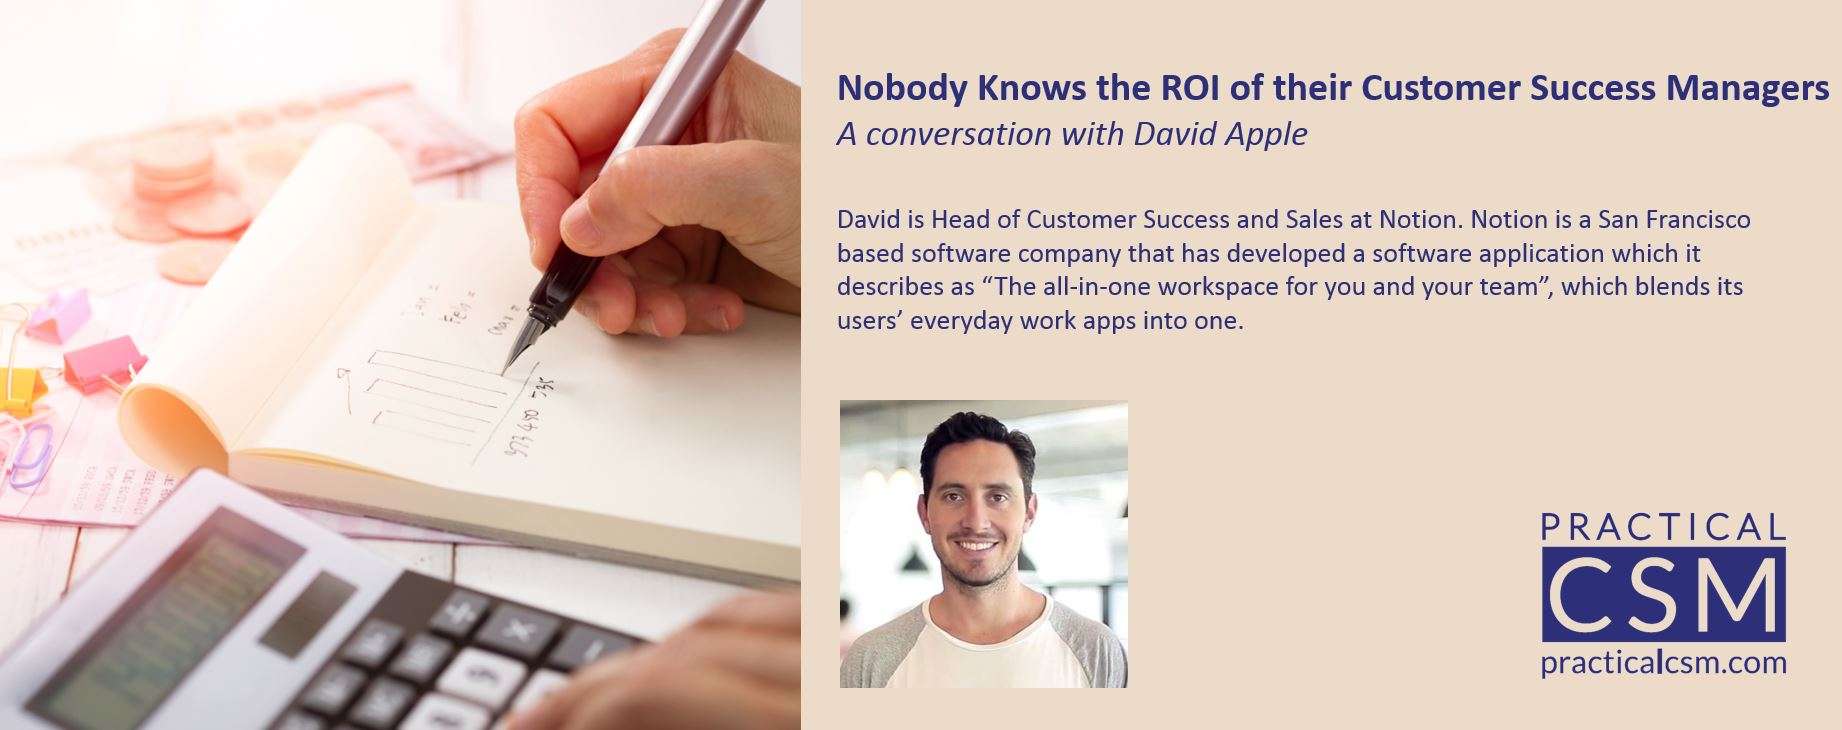 Nobody knows the ROI of their Customer Success Managers with David Apple - Practical CSM